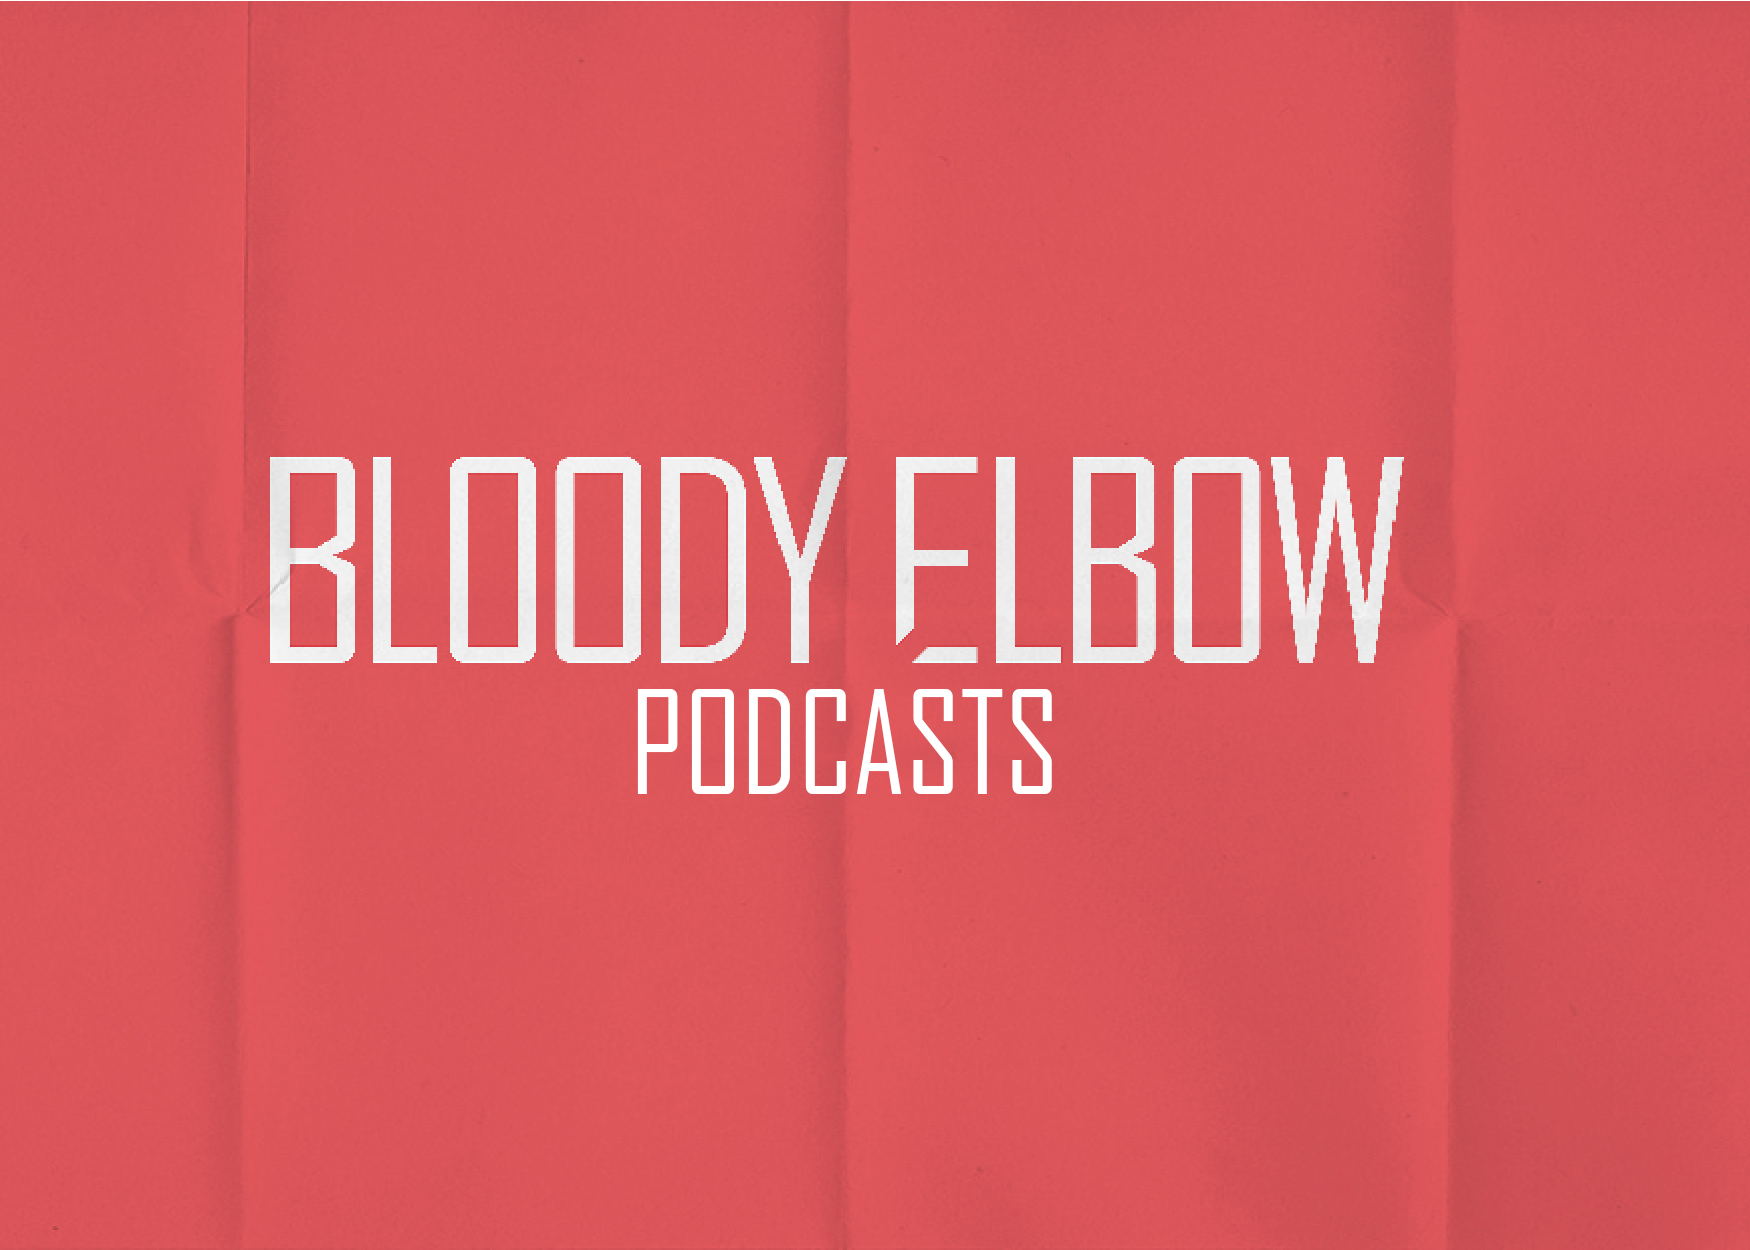 Bloody Elbow podcasts, discussing MMA, UFC and everything in combat sports